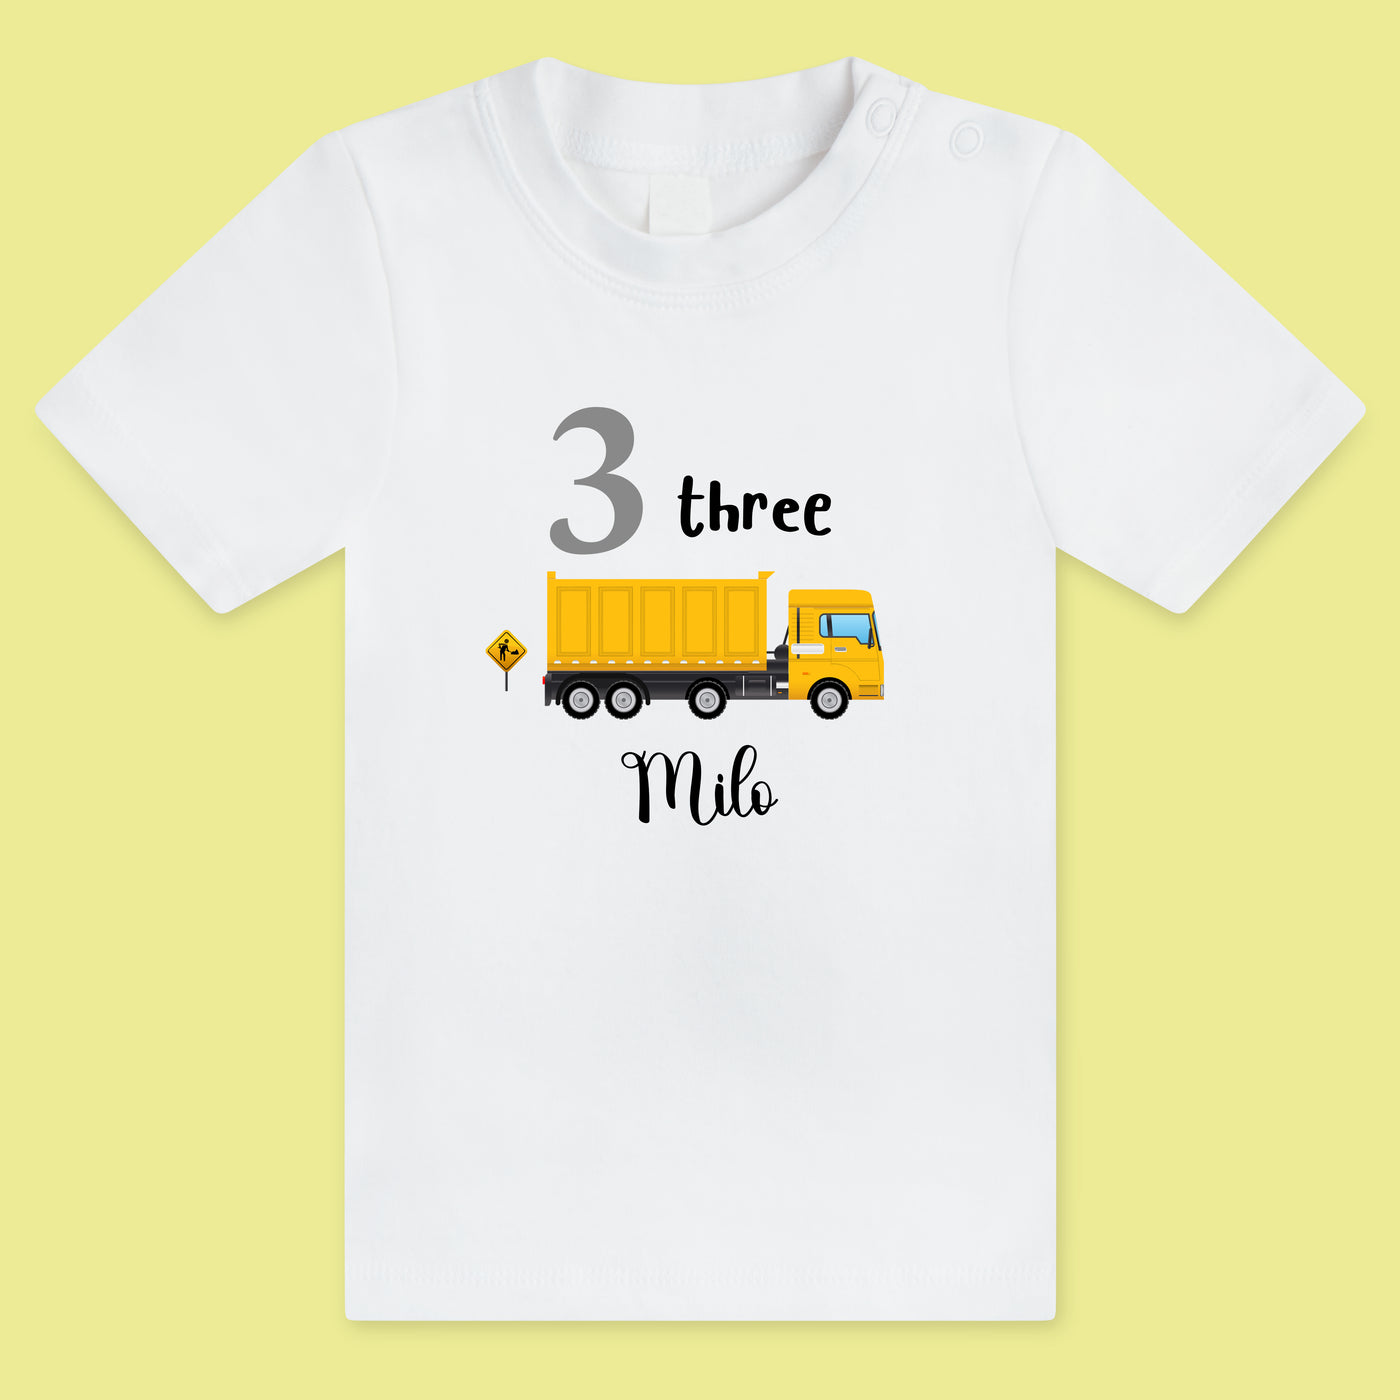 KID'S BIRTHDAY DIGIT T-SHIRT WITH VEHICLE STYLE 3